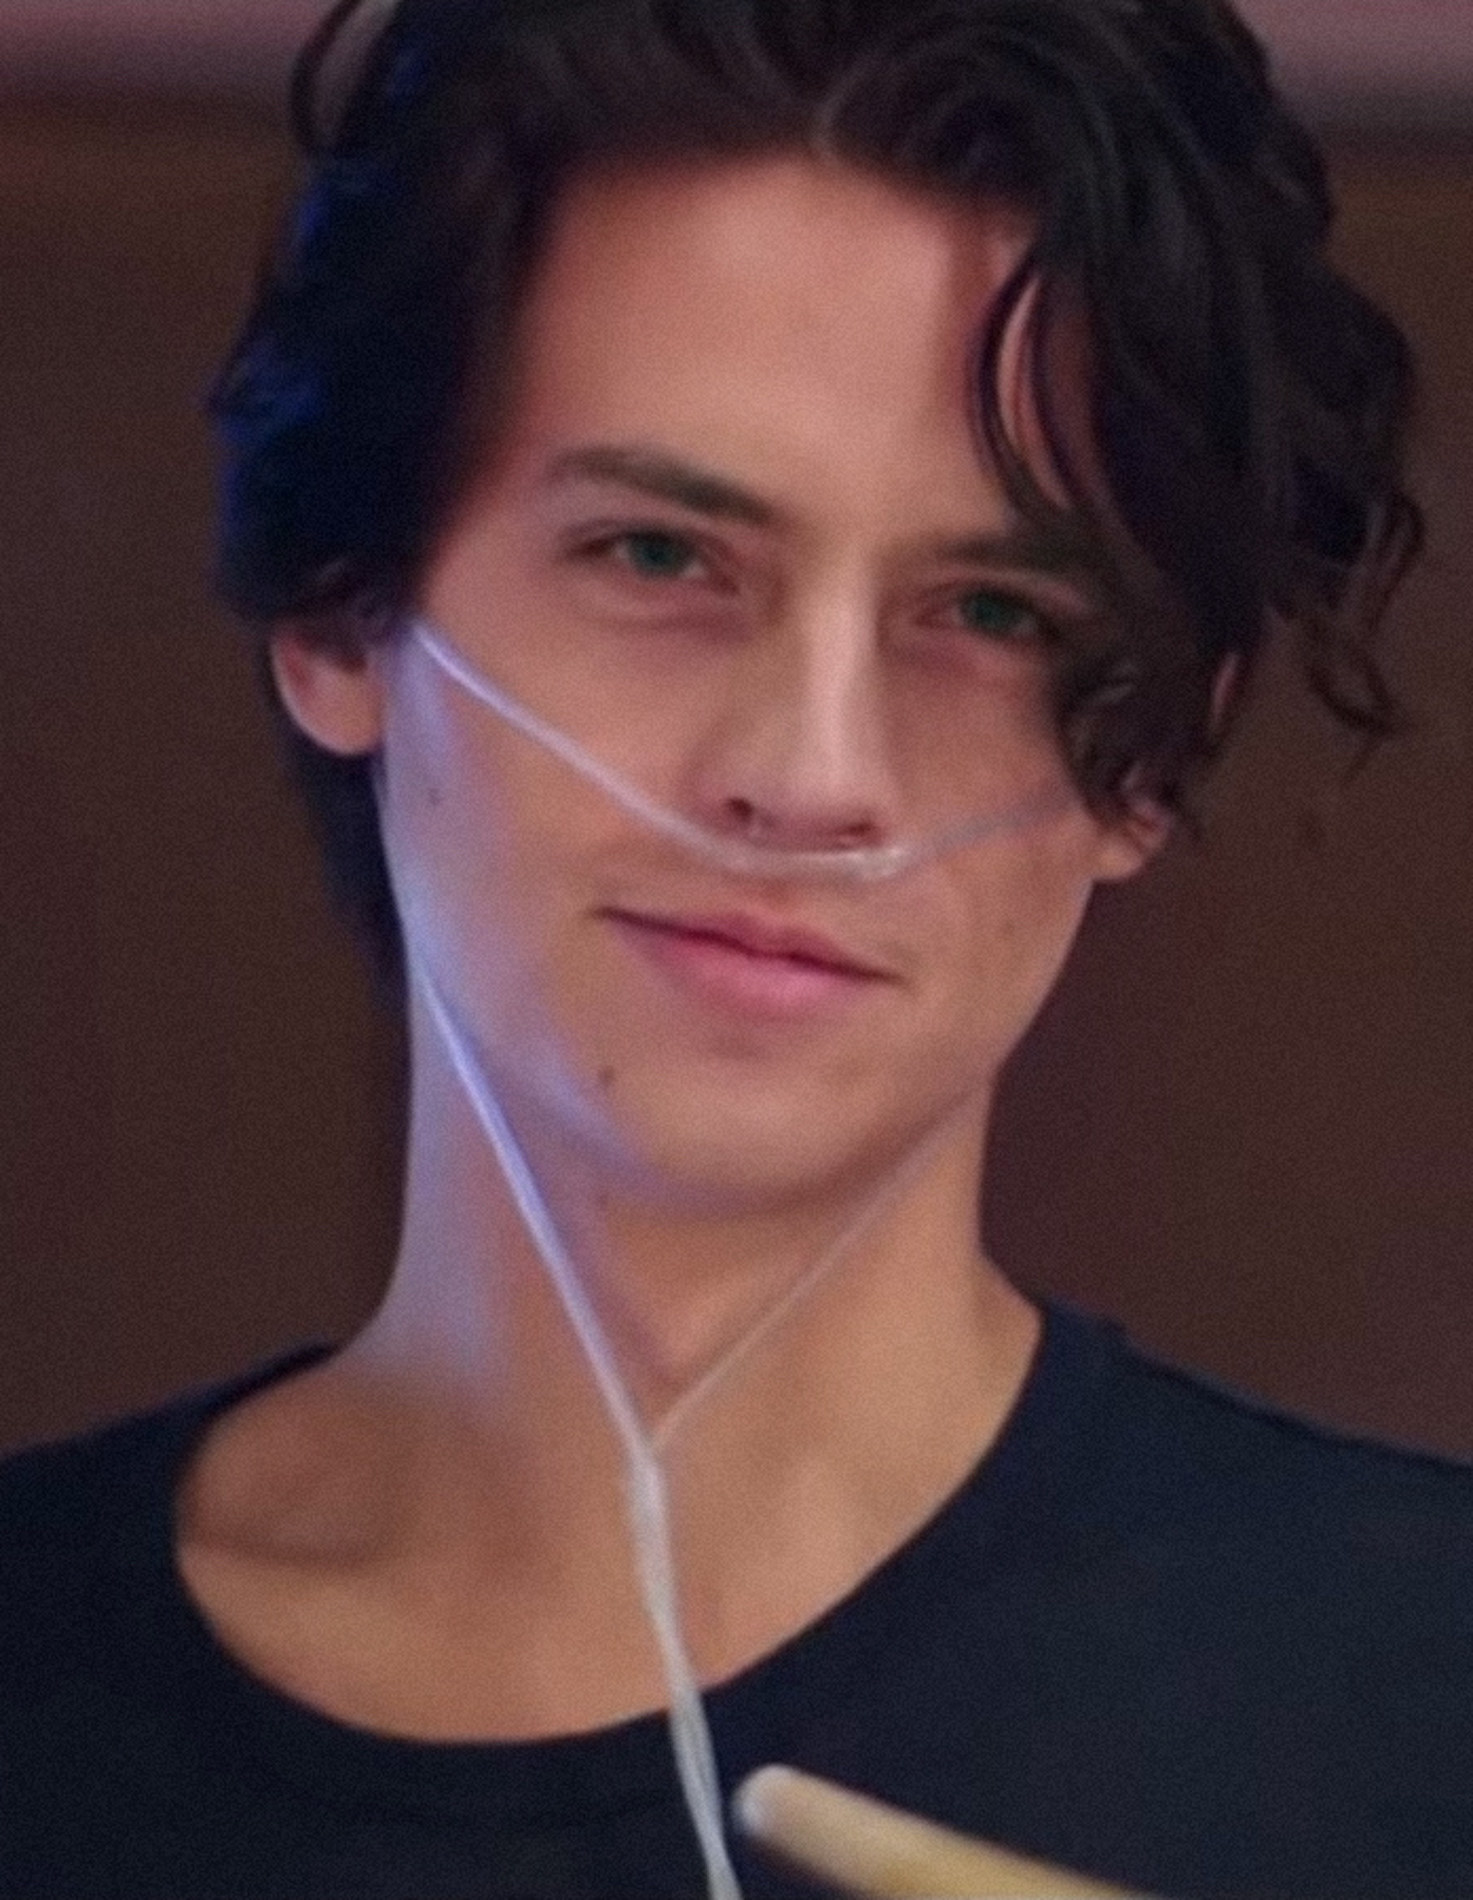 Cole Sprouse wearing an oxygen tube inside of his nose